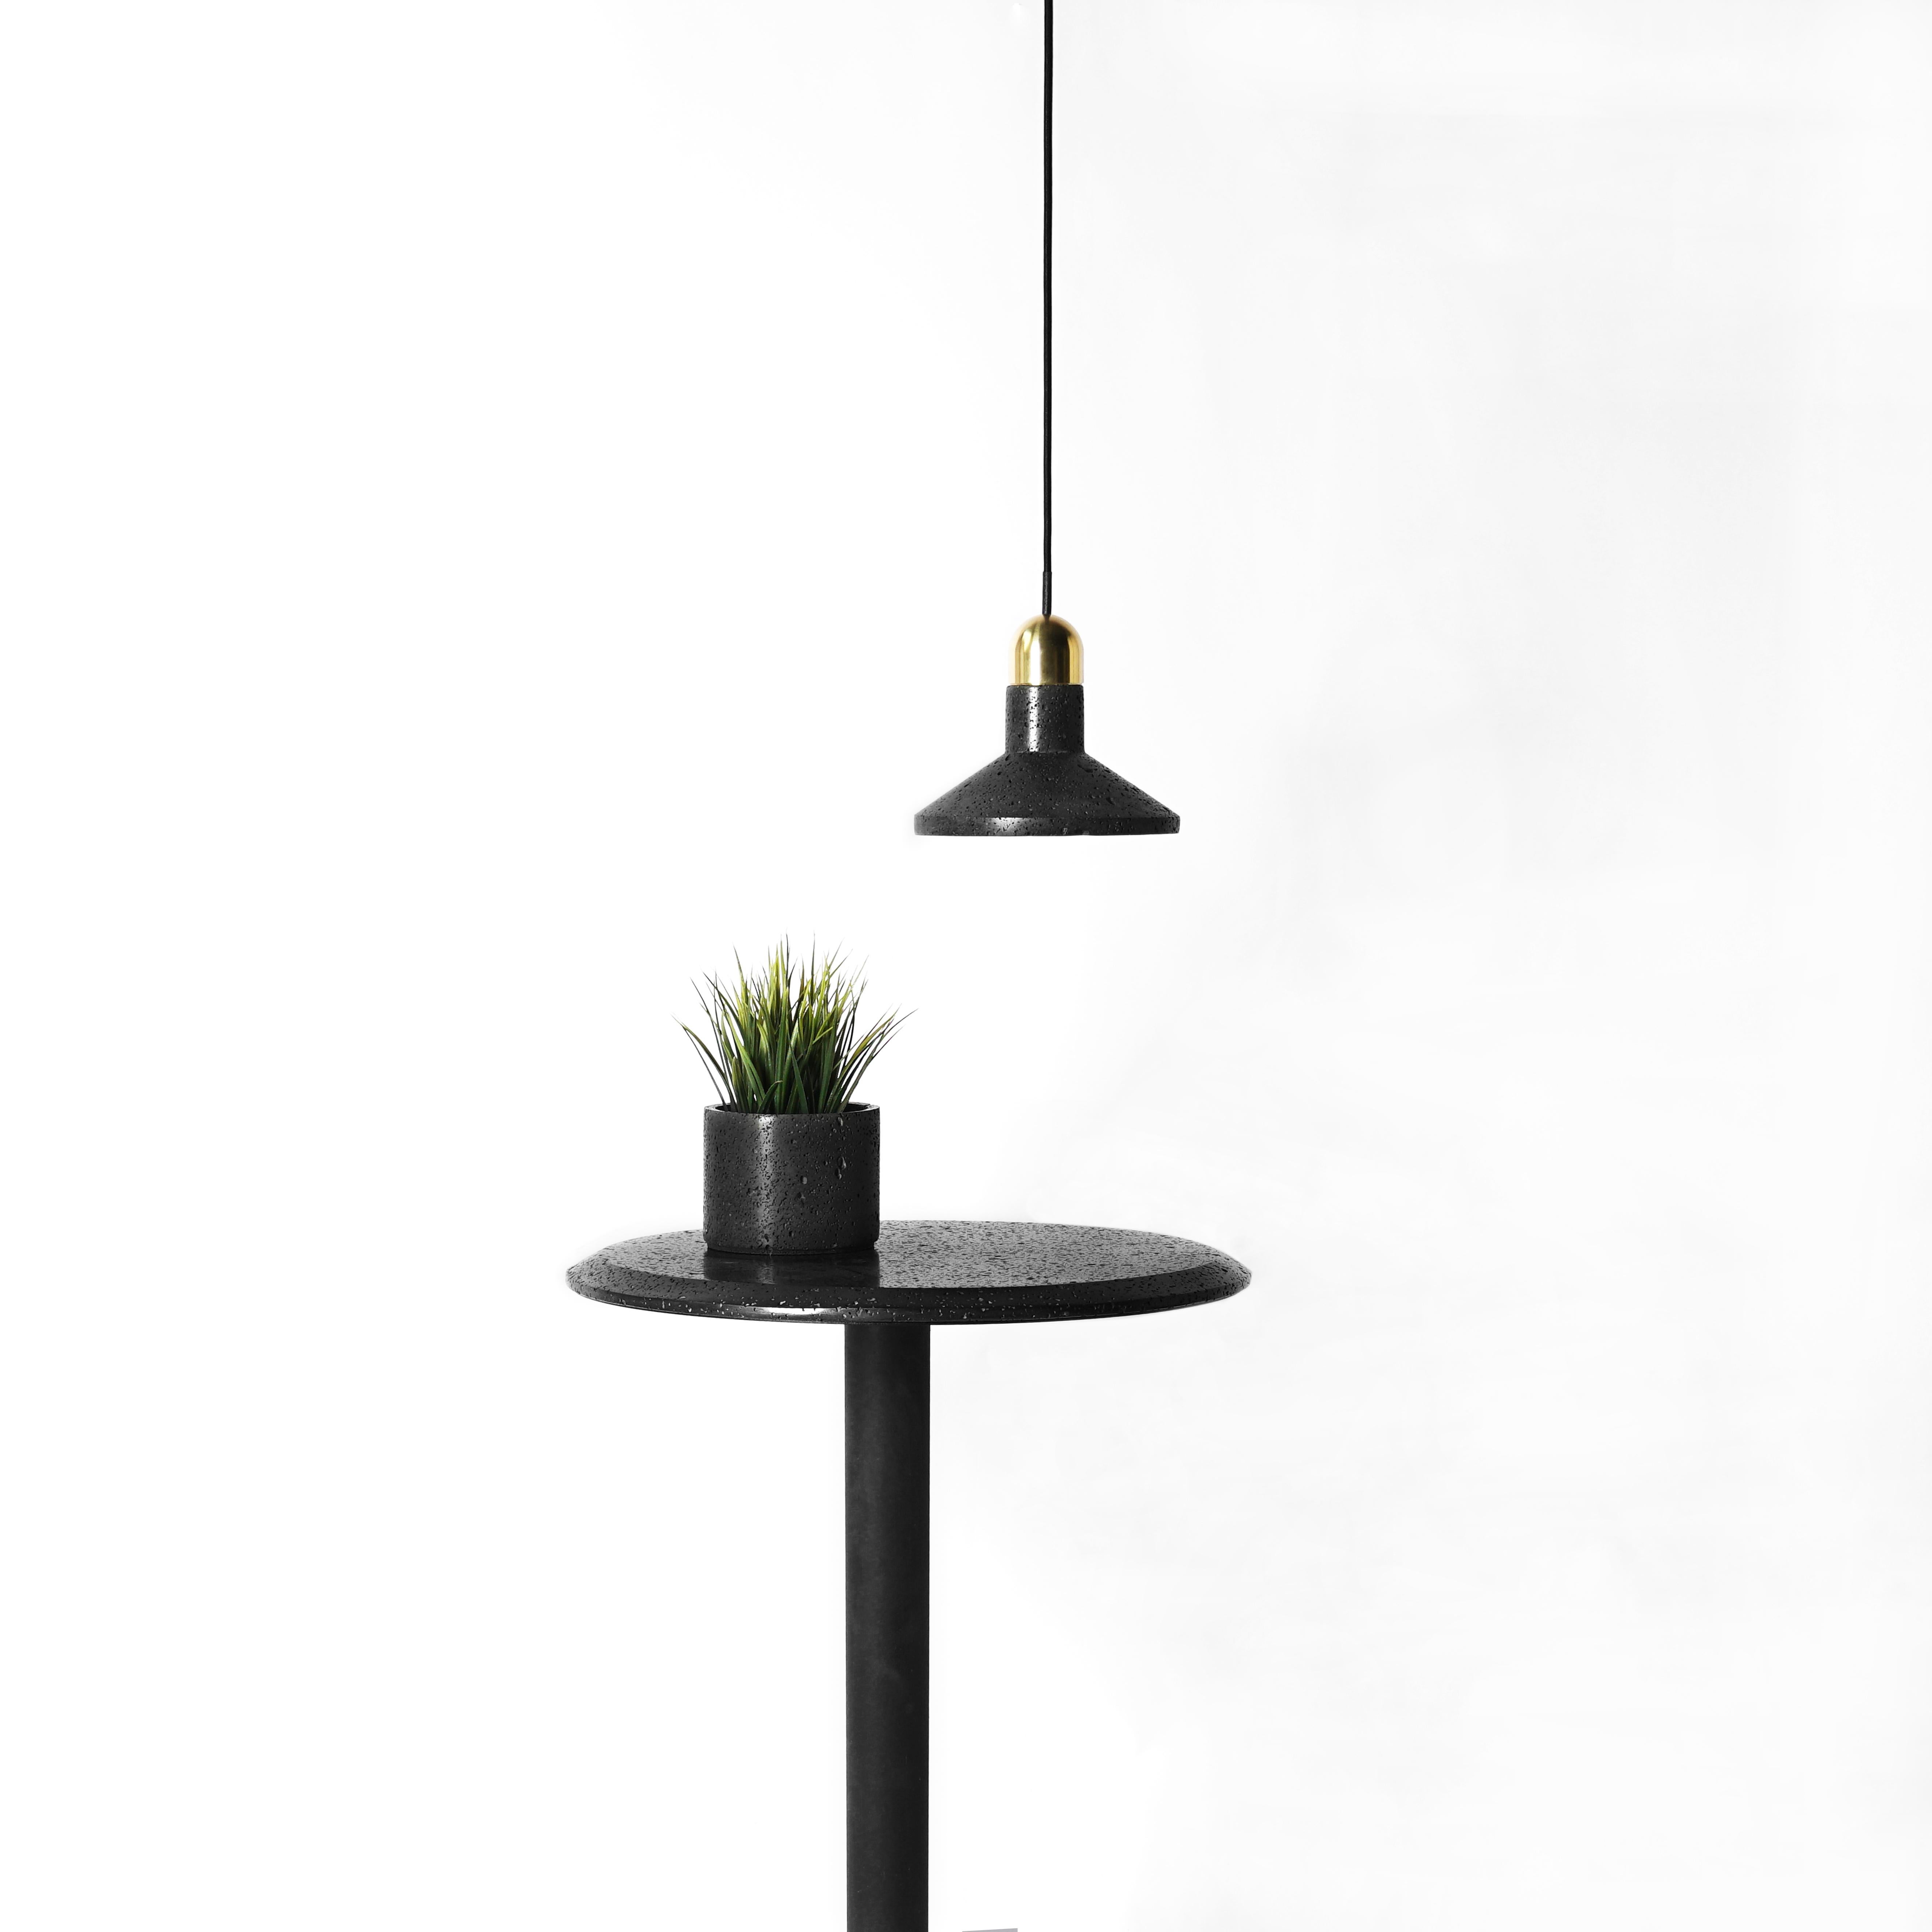 Material: Lava stone
Base: Black powder-coated steel
Color: Black
Dimension: 500 x 500 x 730 mm

About the artist/ designer:
The word “buzao” means “I don't know” in Chinese, deriving from the popular expression of Chinese millennial